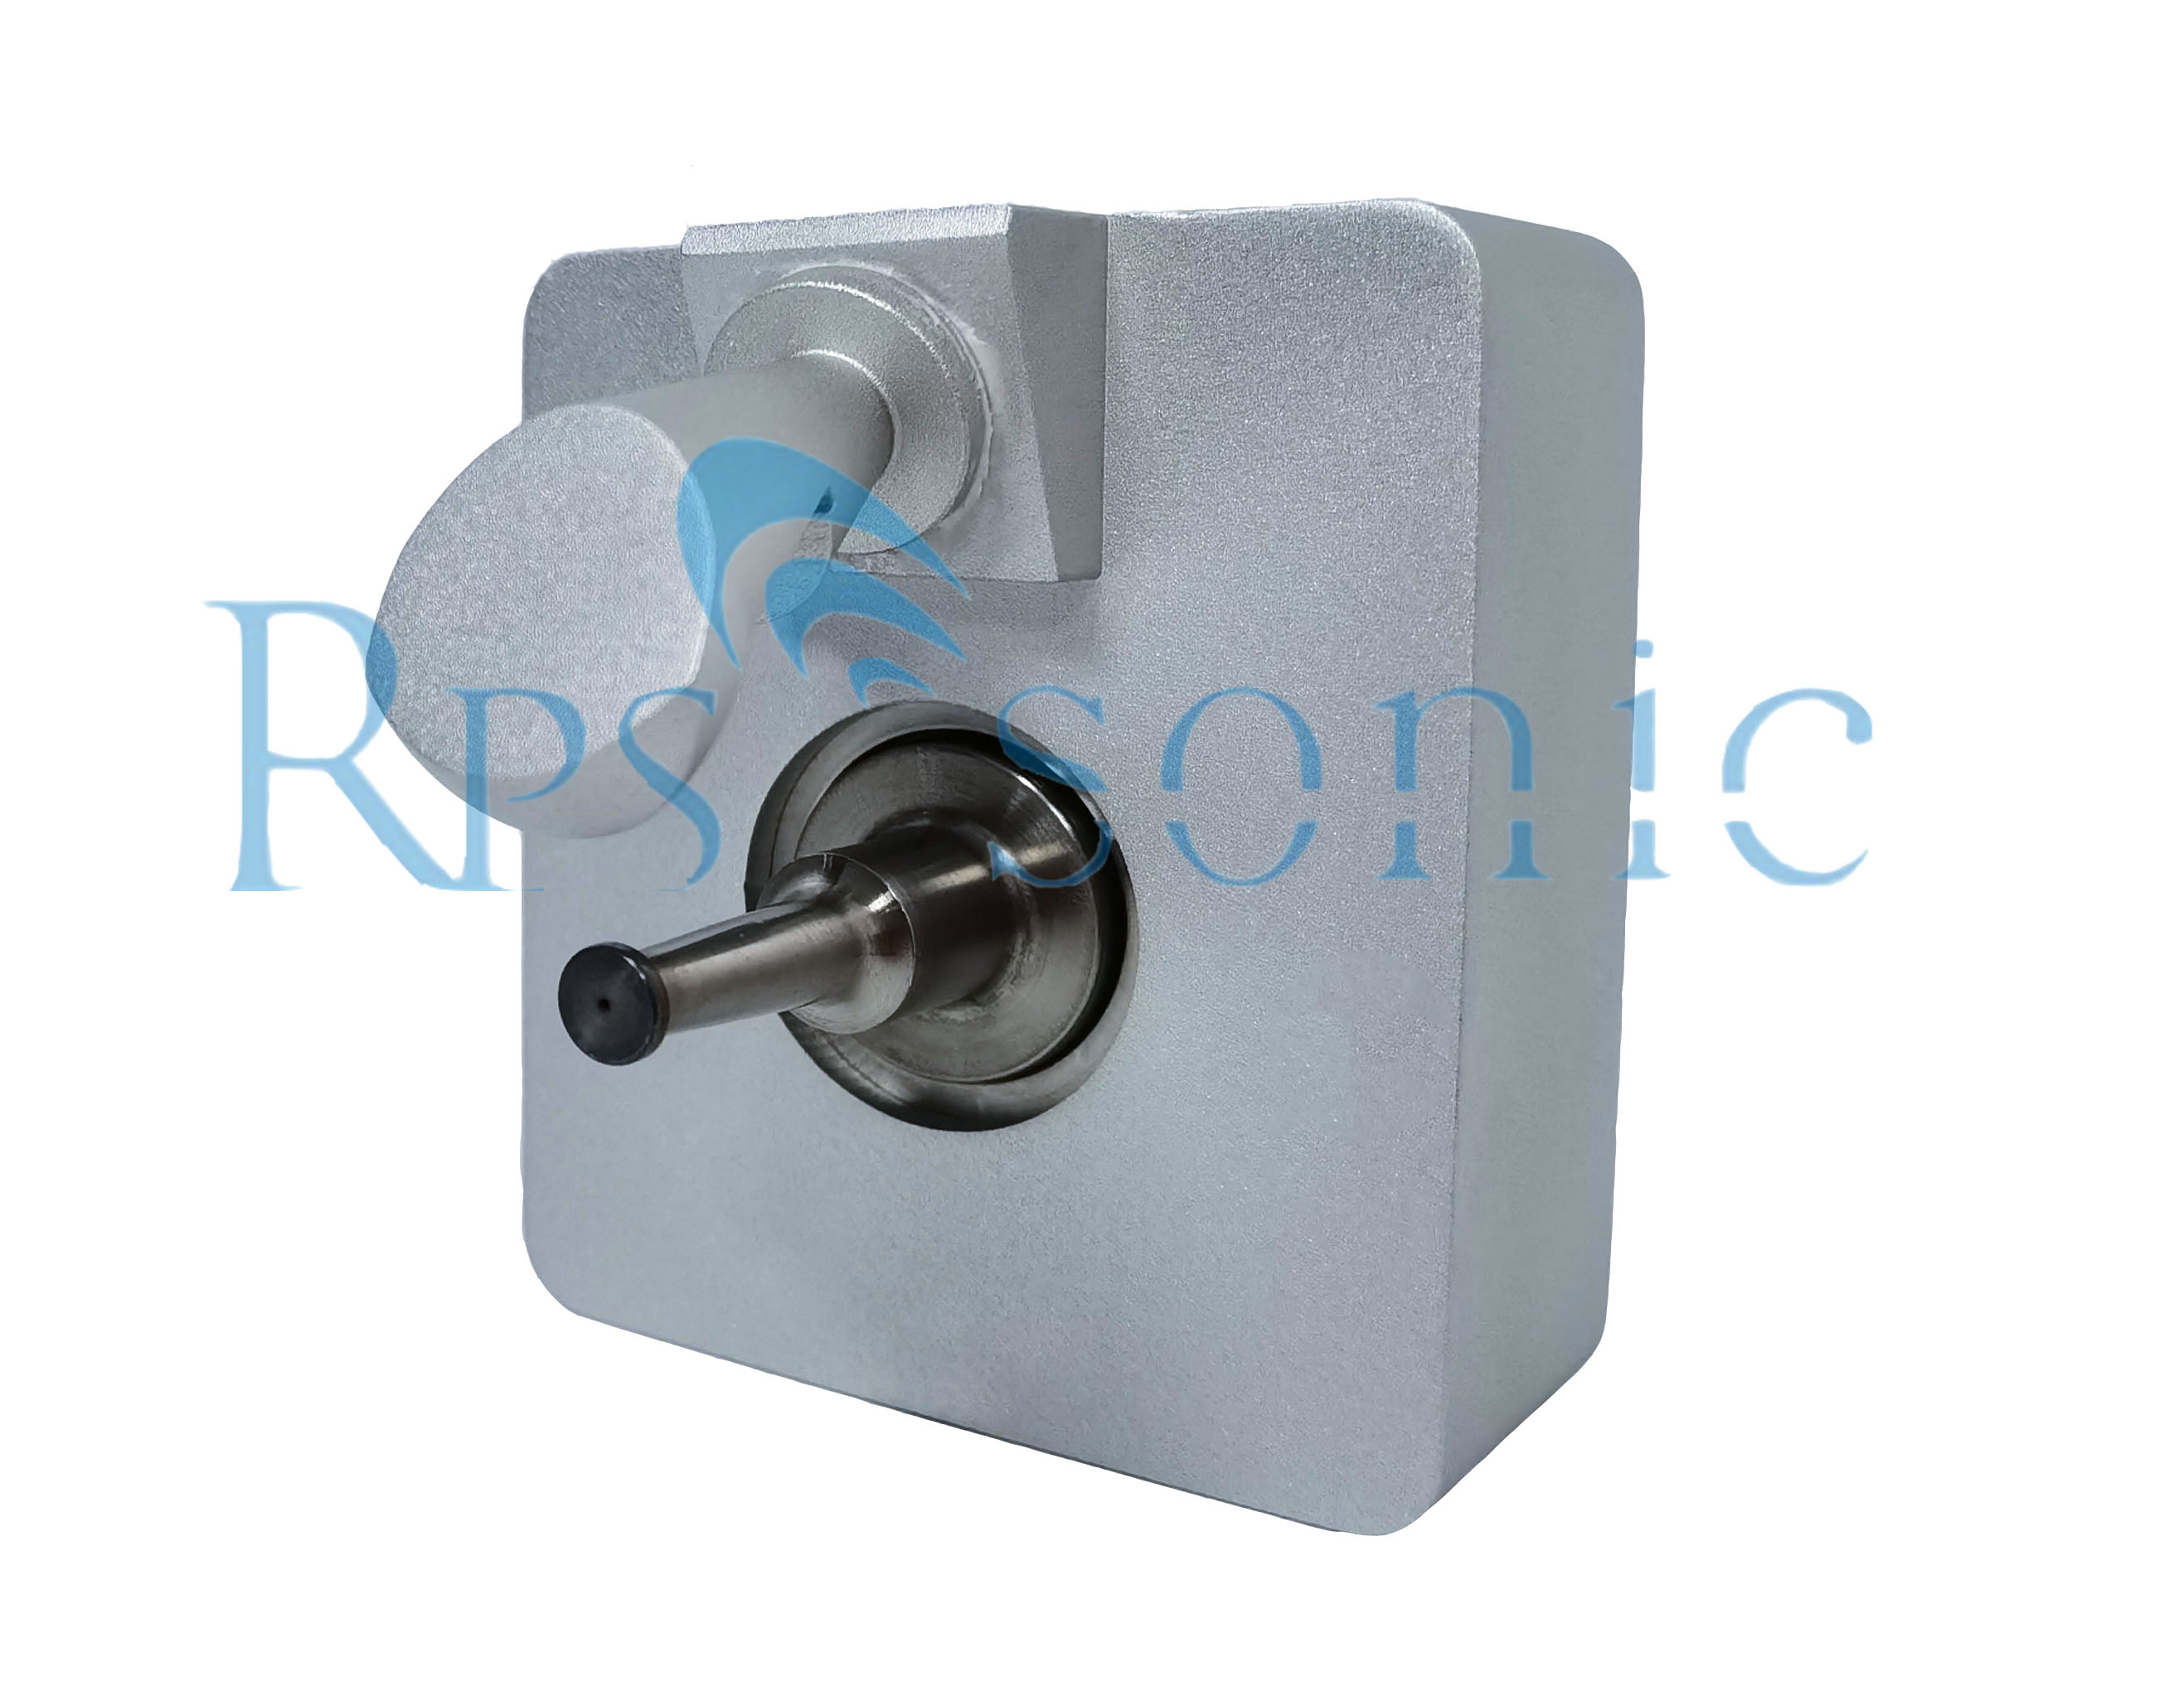 High Frequency Ultrasonic Atomization Nozzle for antimicrobial coatings